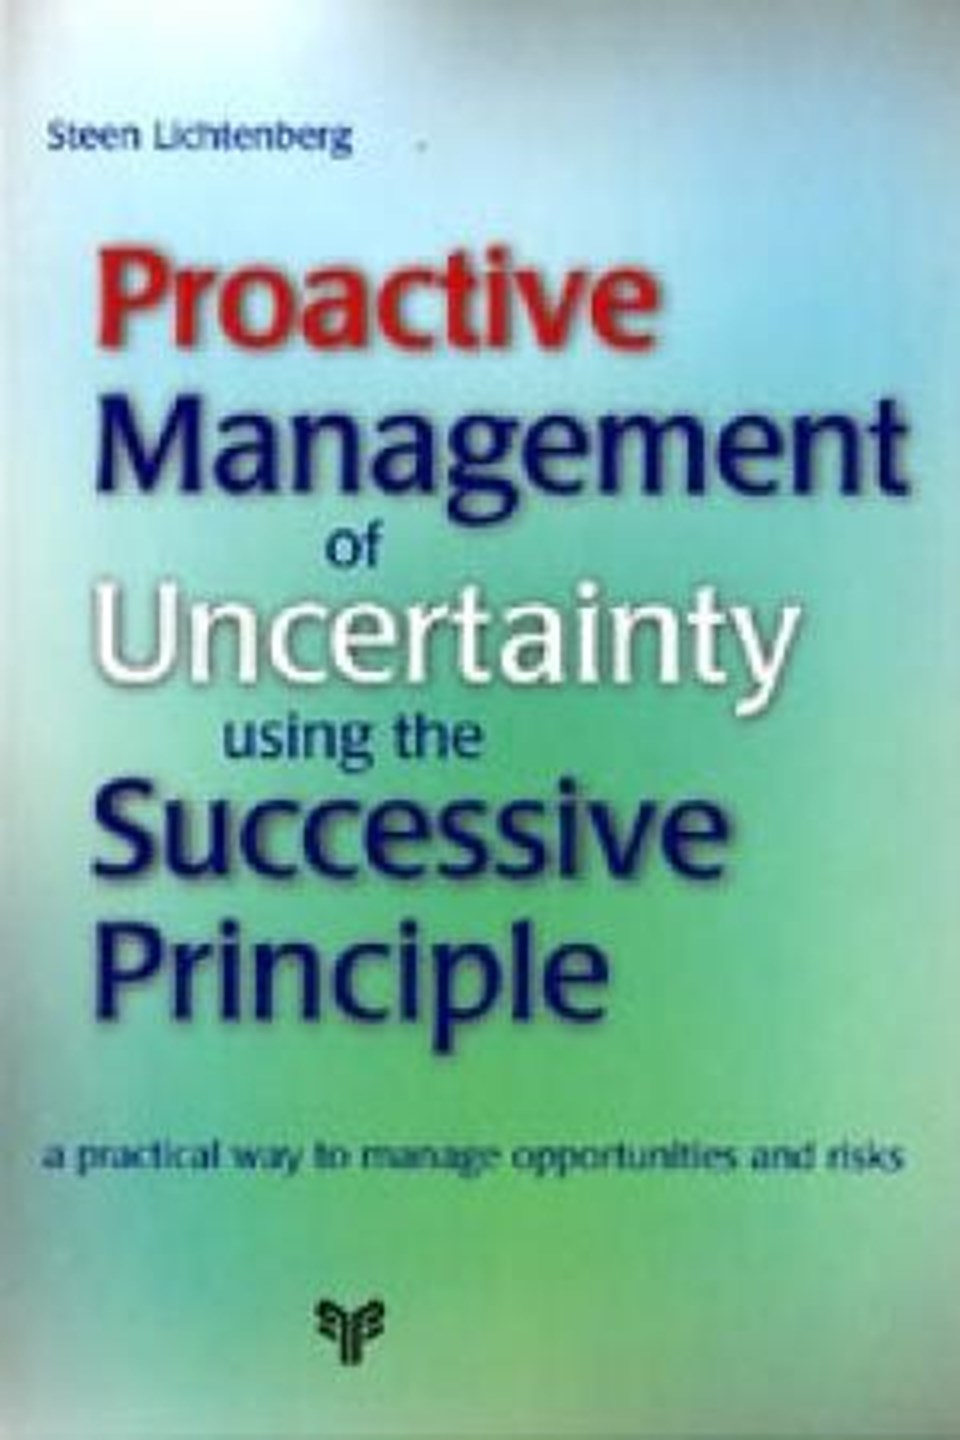 Proactive management of uncertainty - using the